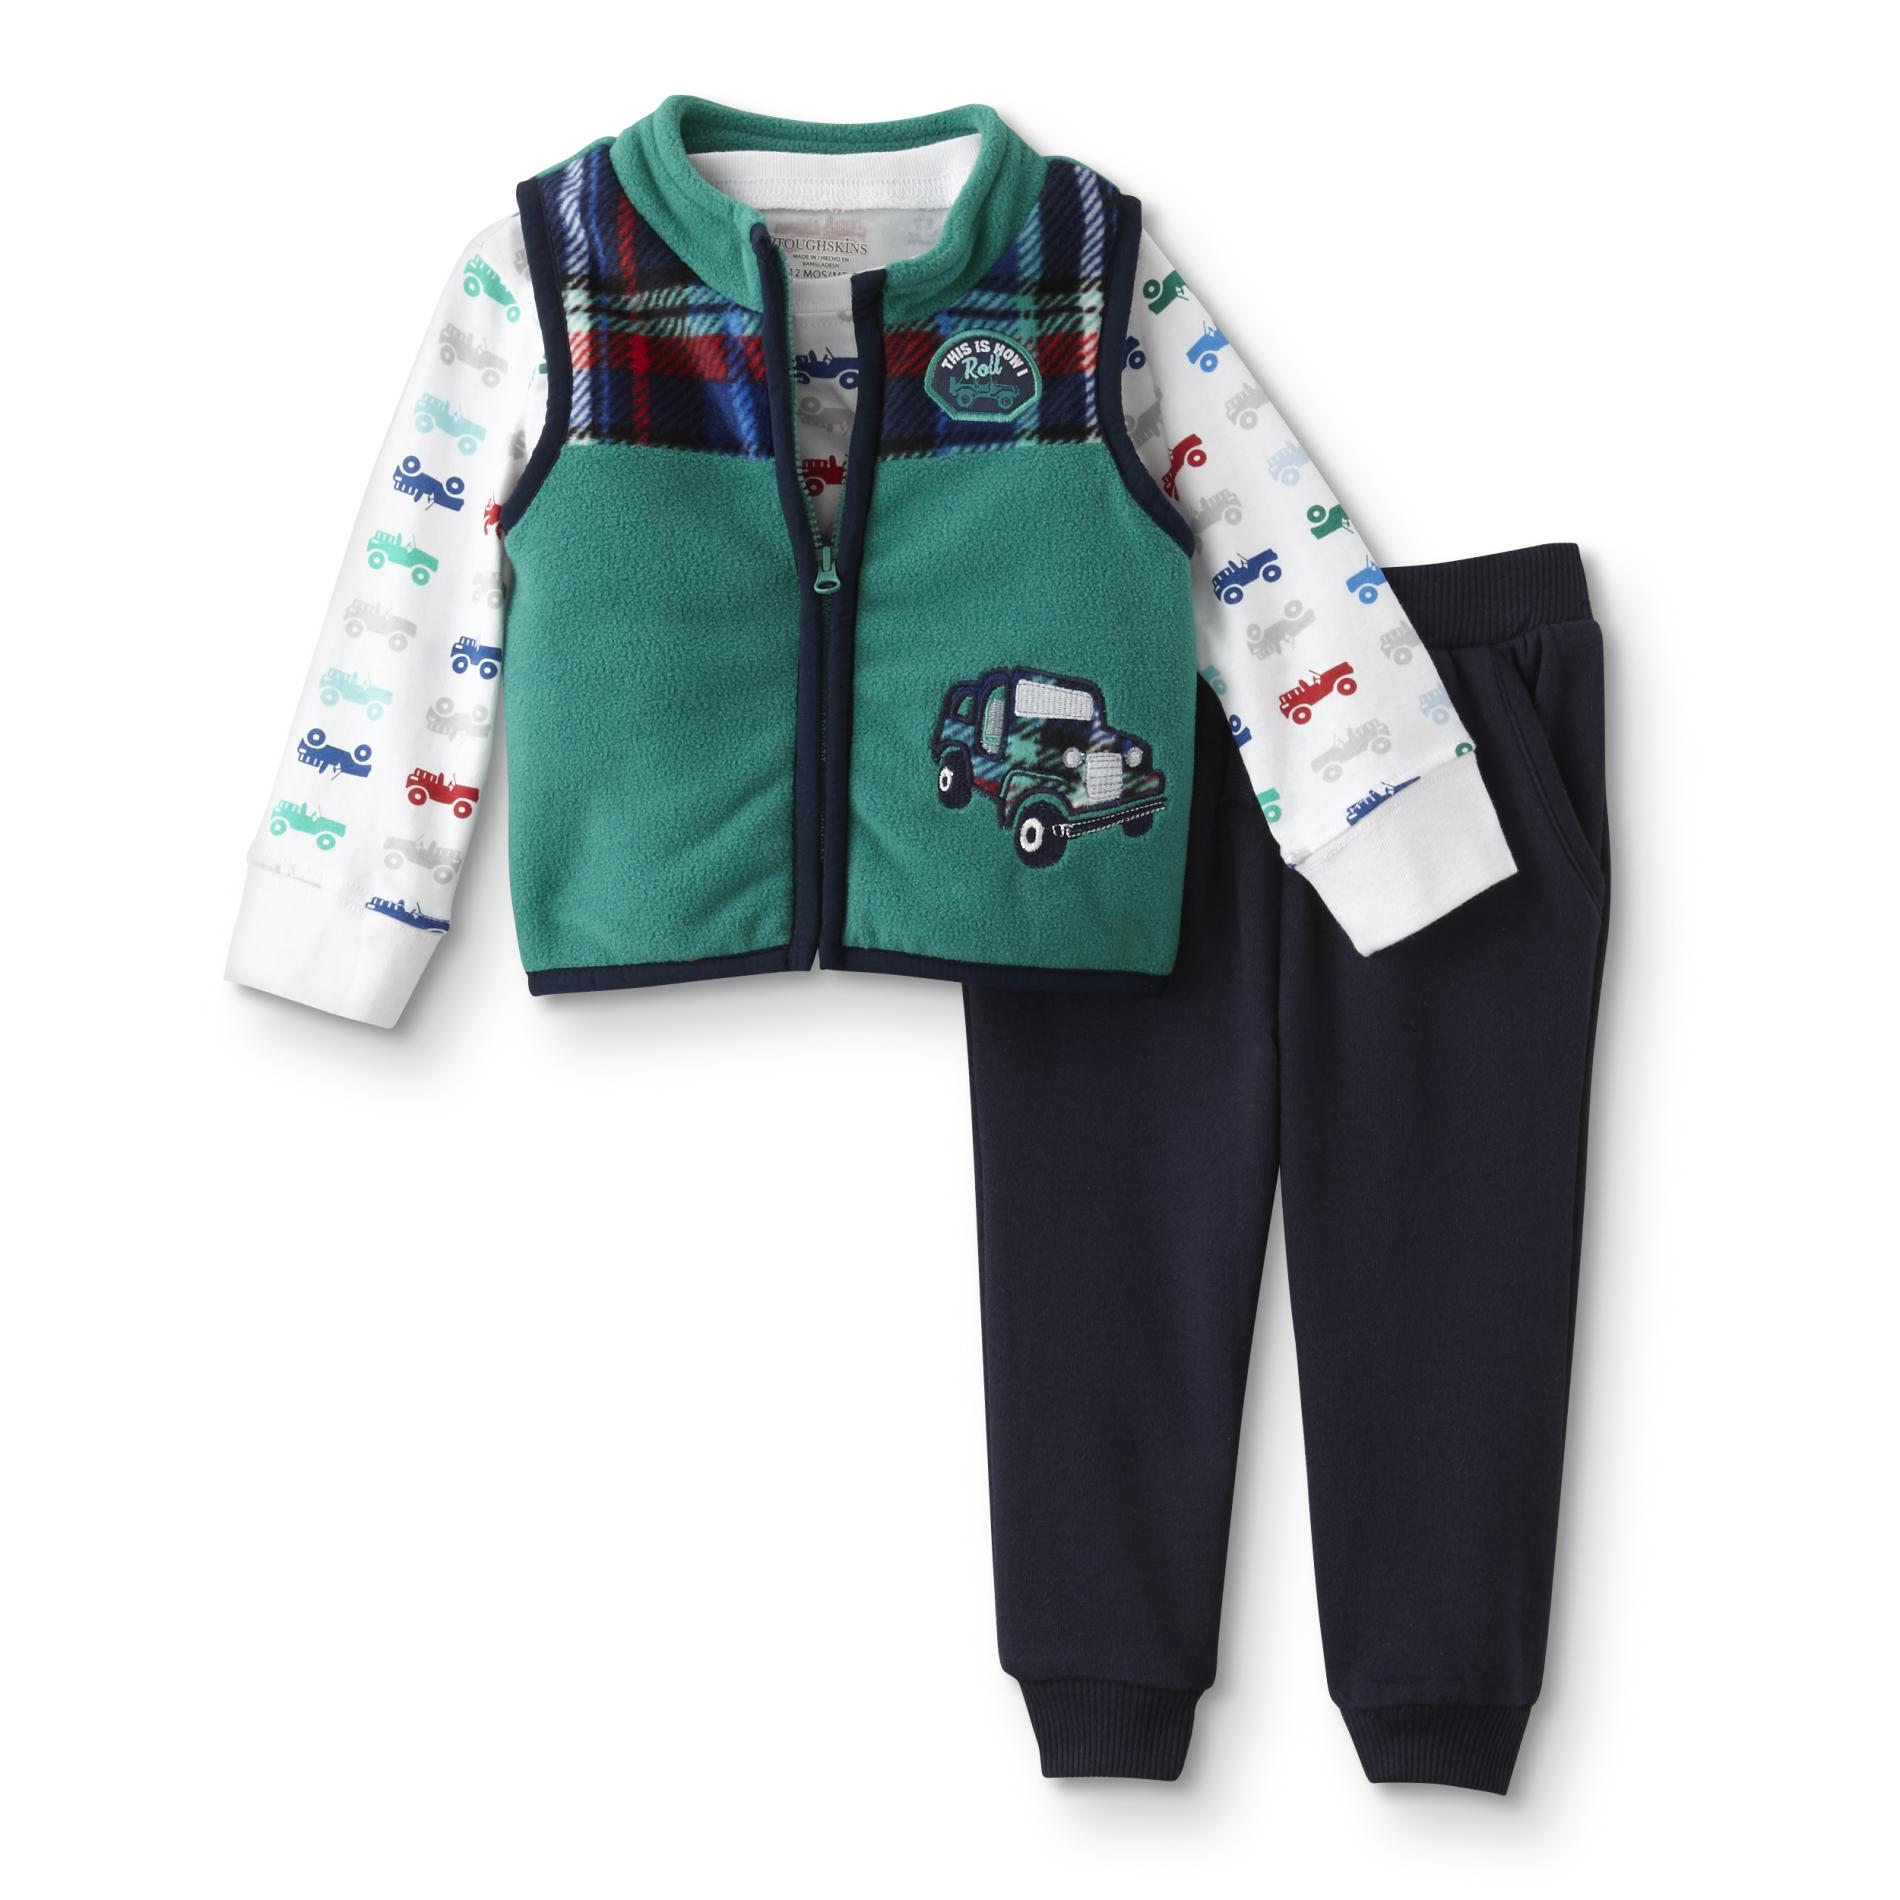 Toughskins Baby Clothing Sets - Sears